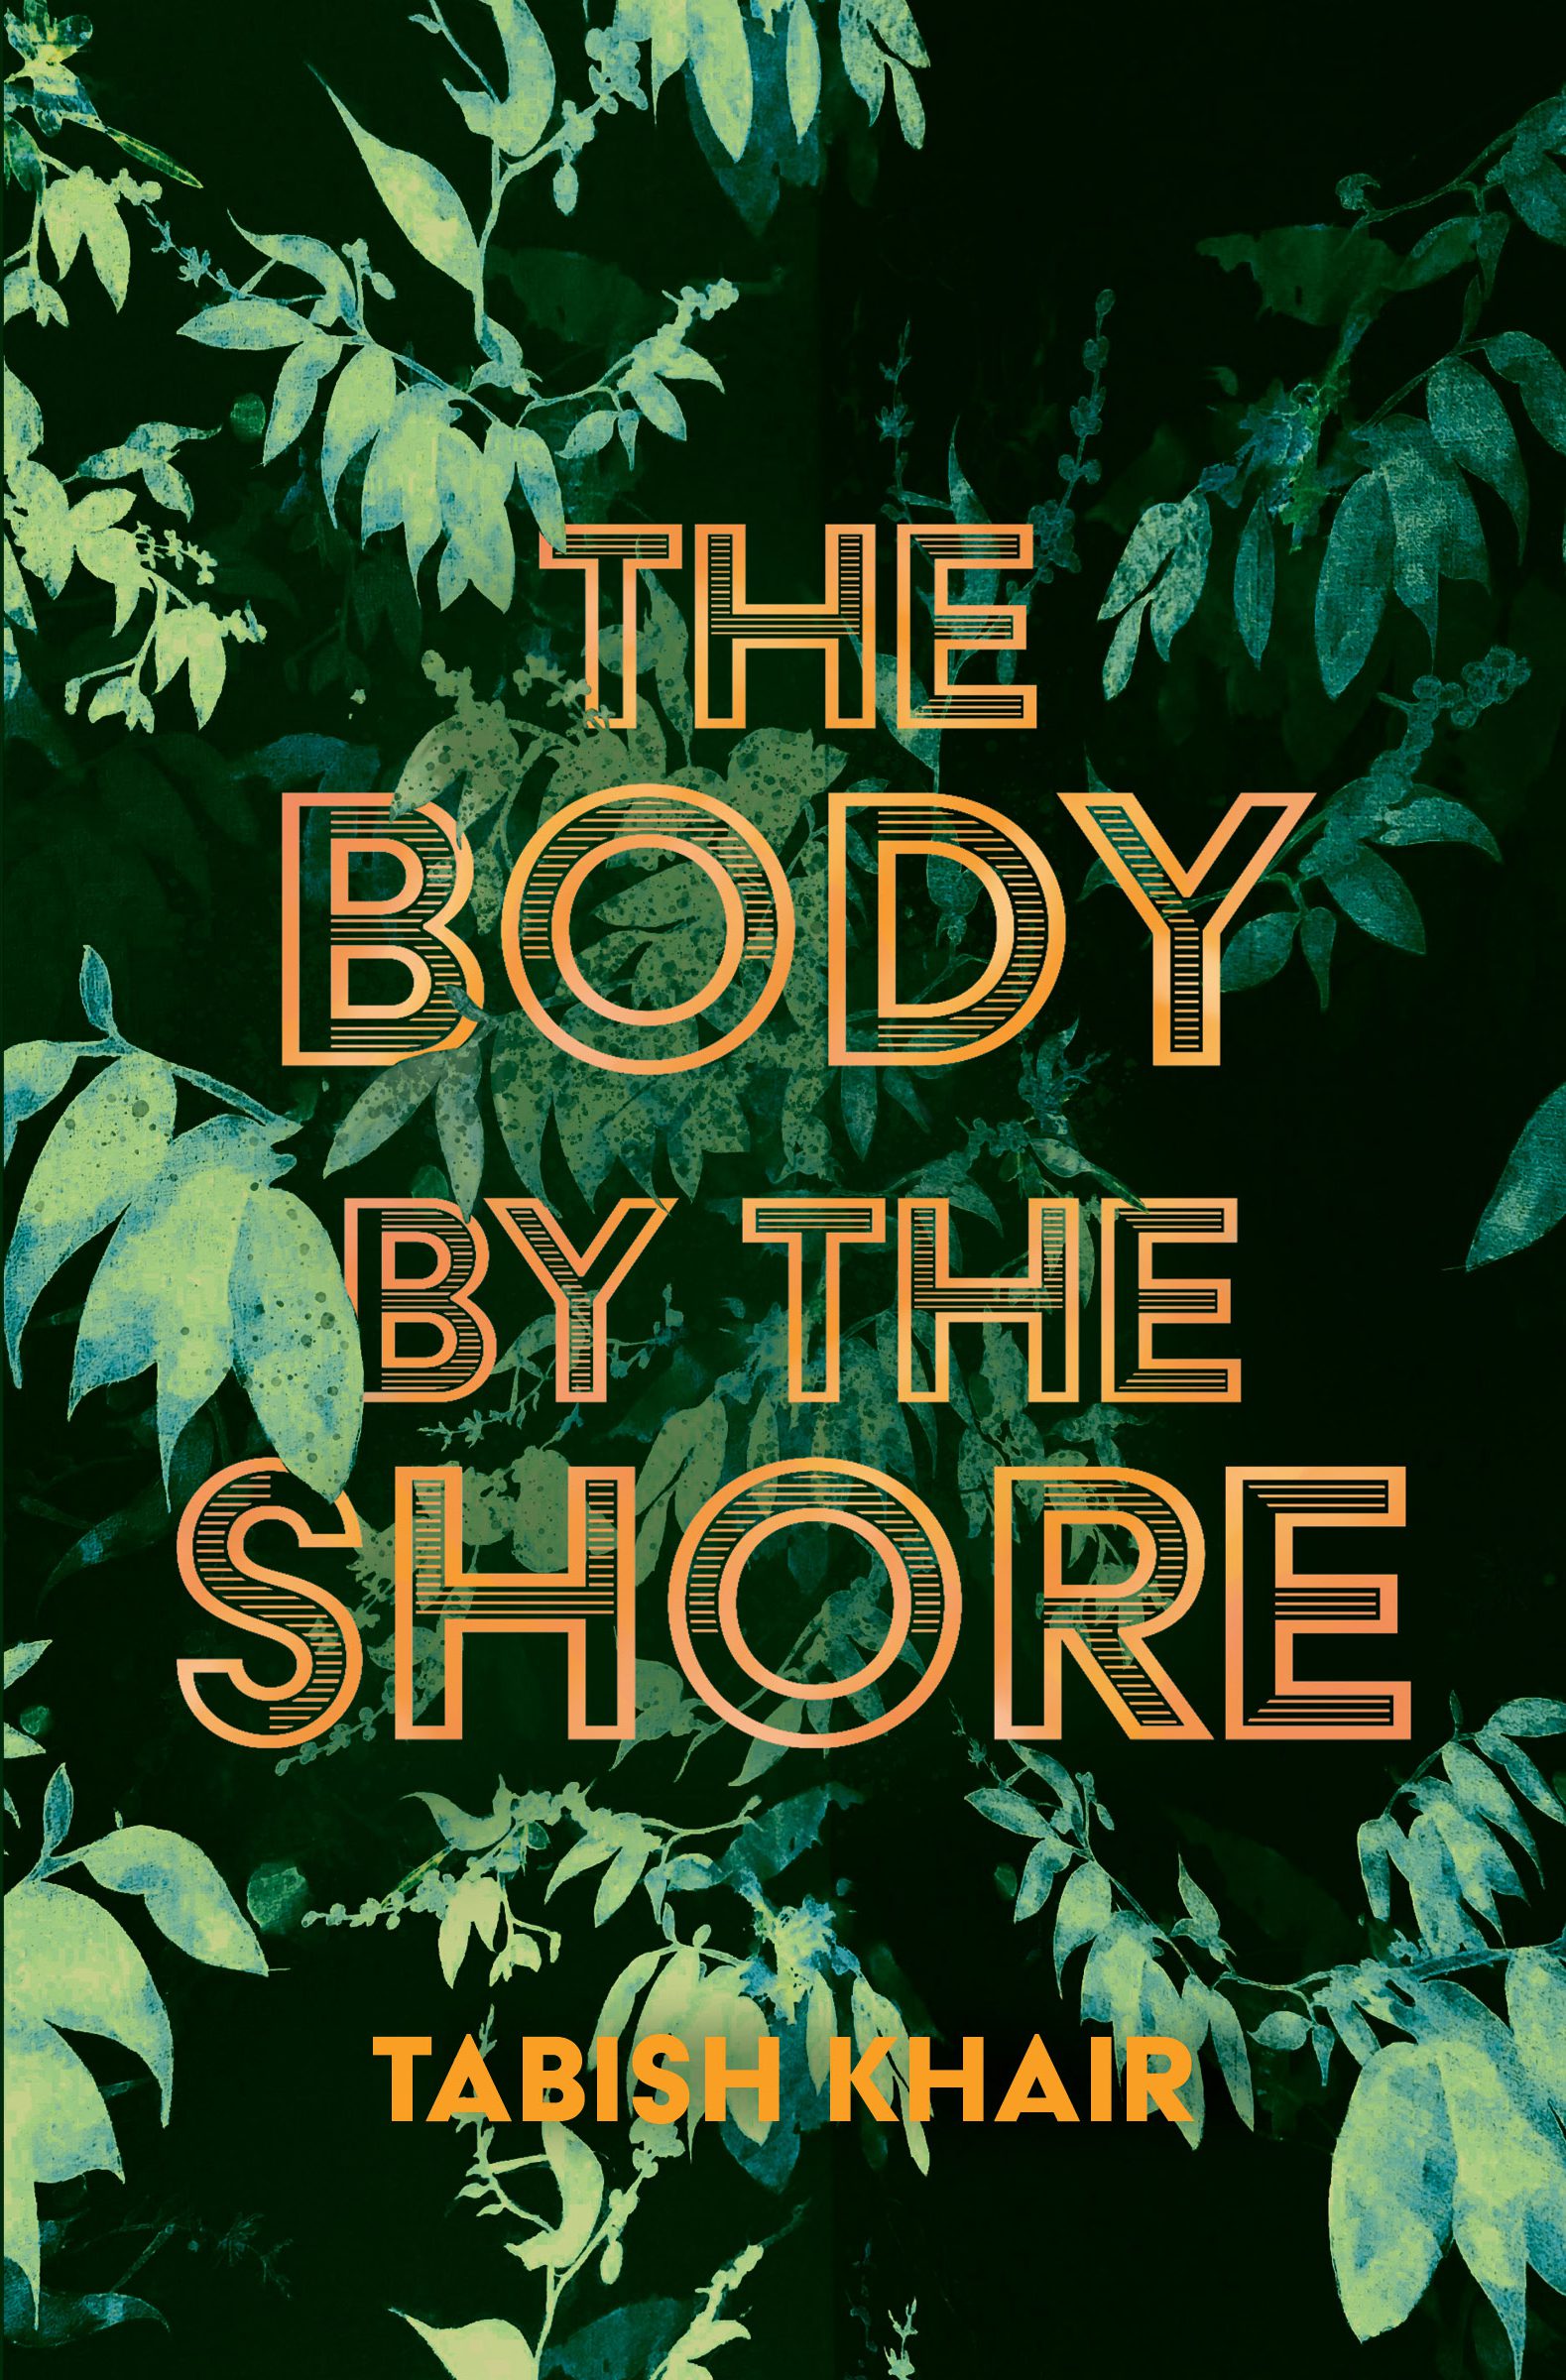 The Body by the Shore